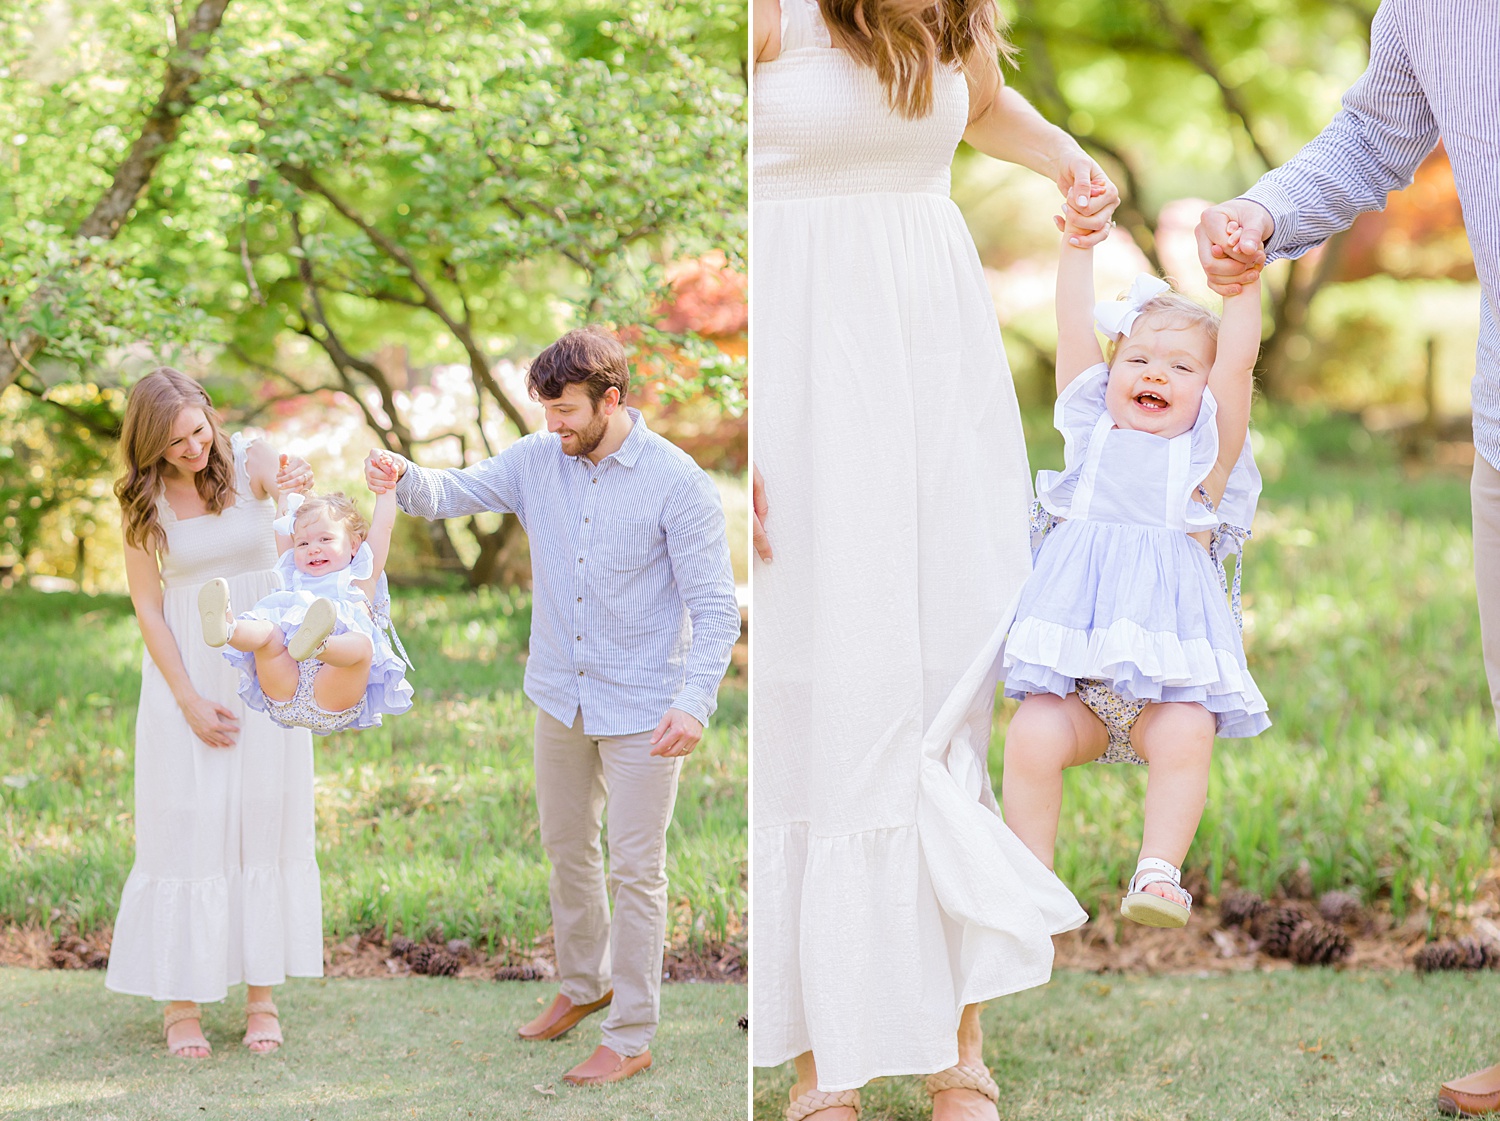 parents swing their daughter as they walk through gardens